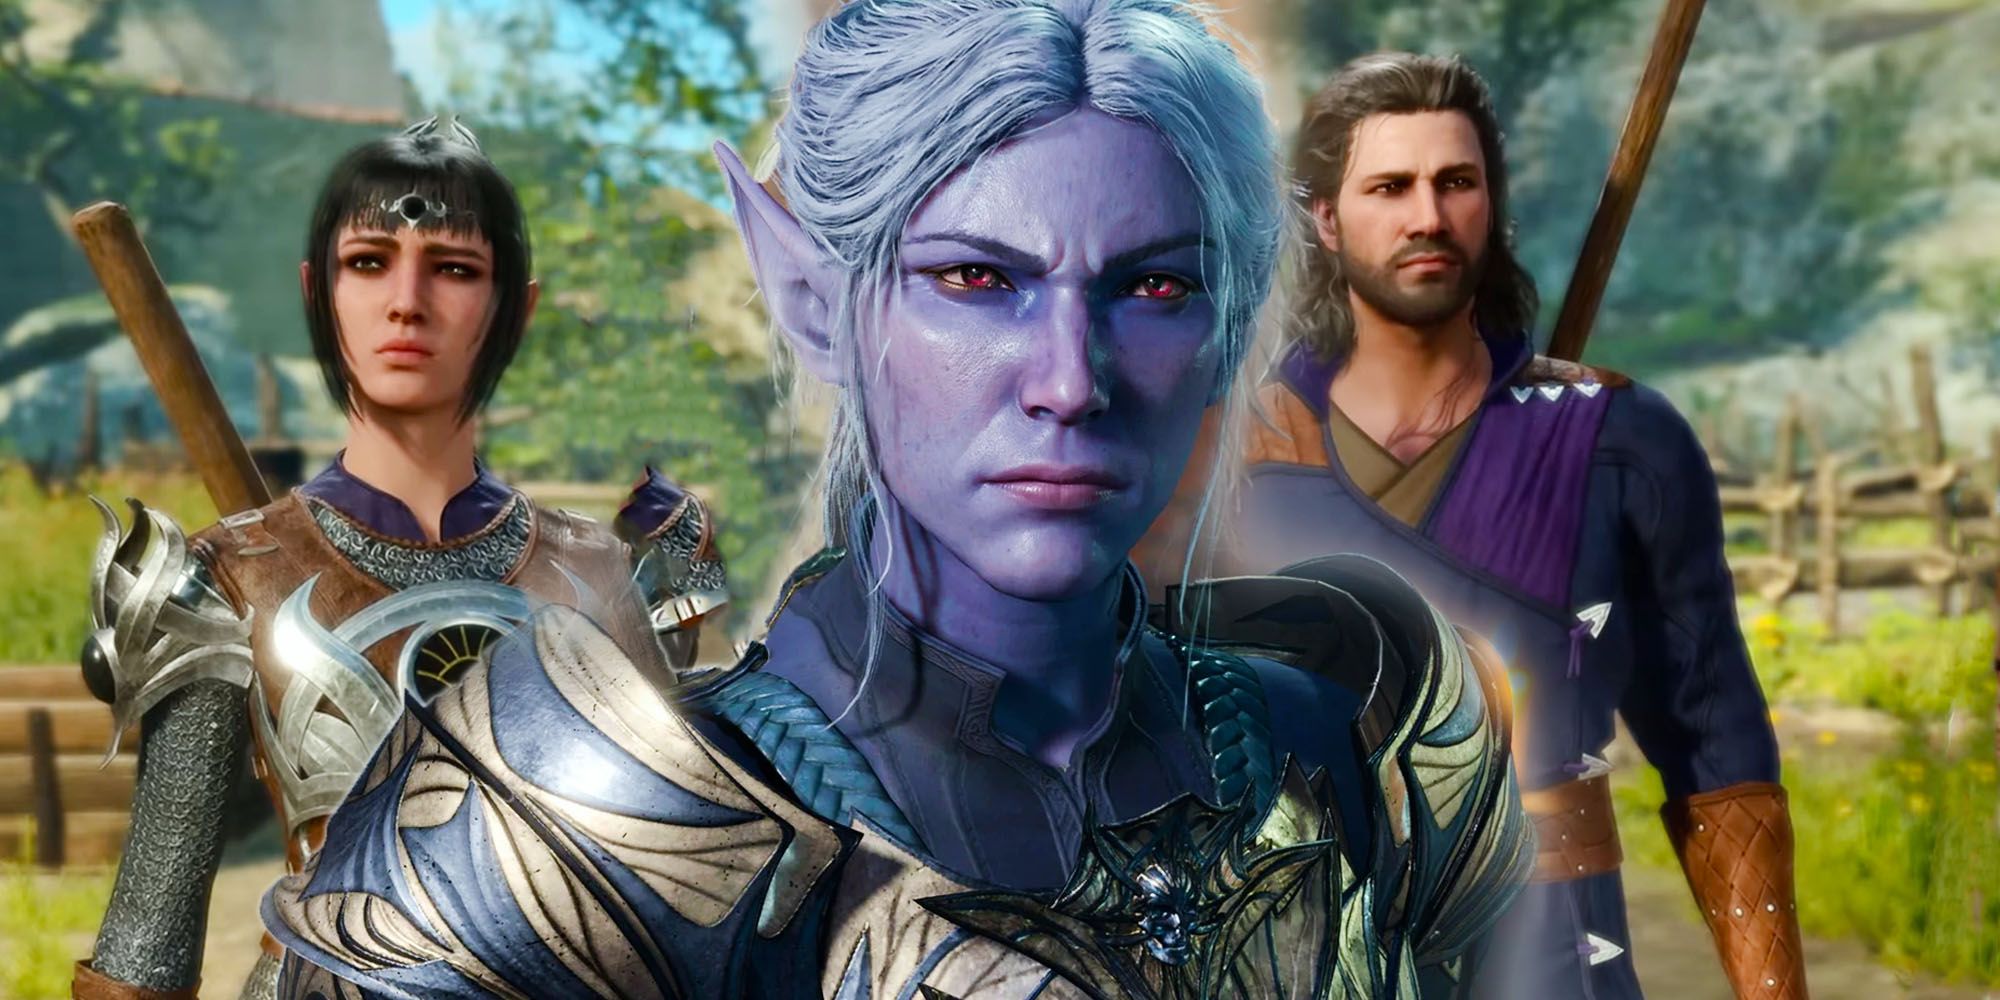 Three Baldur's Gate 3 companions. In the center is Minthara, a dark elf with red eyes and silver hair. Over her shoulders are Shadowheart, a high half-elf, and Gale, a human. Both have lighter complexions and dark hair. All three are in front of a countryside background.